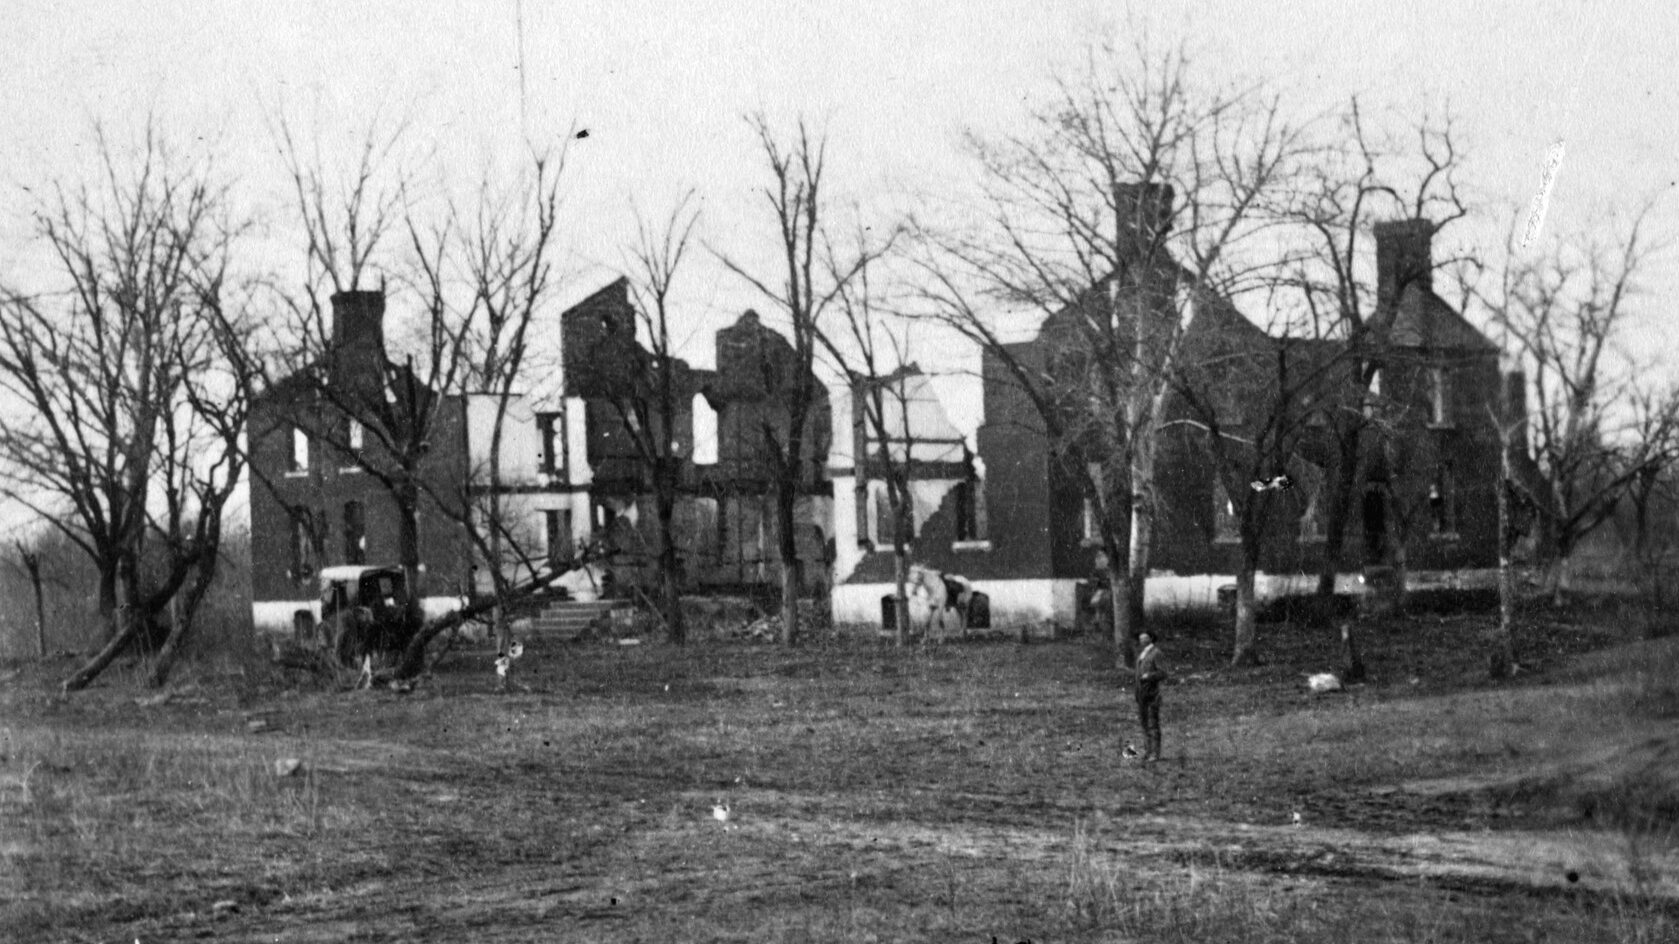 The Chancellor House on the Orange Turnpike suffered heavy damage from shells fired by Confederate artillery. Maj. Gen. Joseph Hooker was leaning against a wood pillar on the second-story porch on the morning of May 3 observing the battle when a shell dislodged the pillar, knocking him temporarily unconscious.